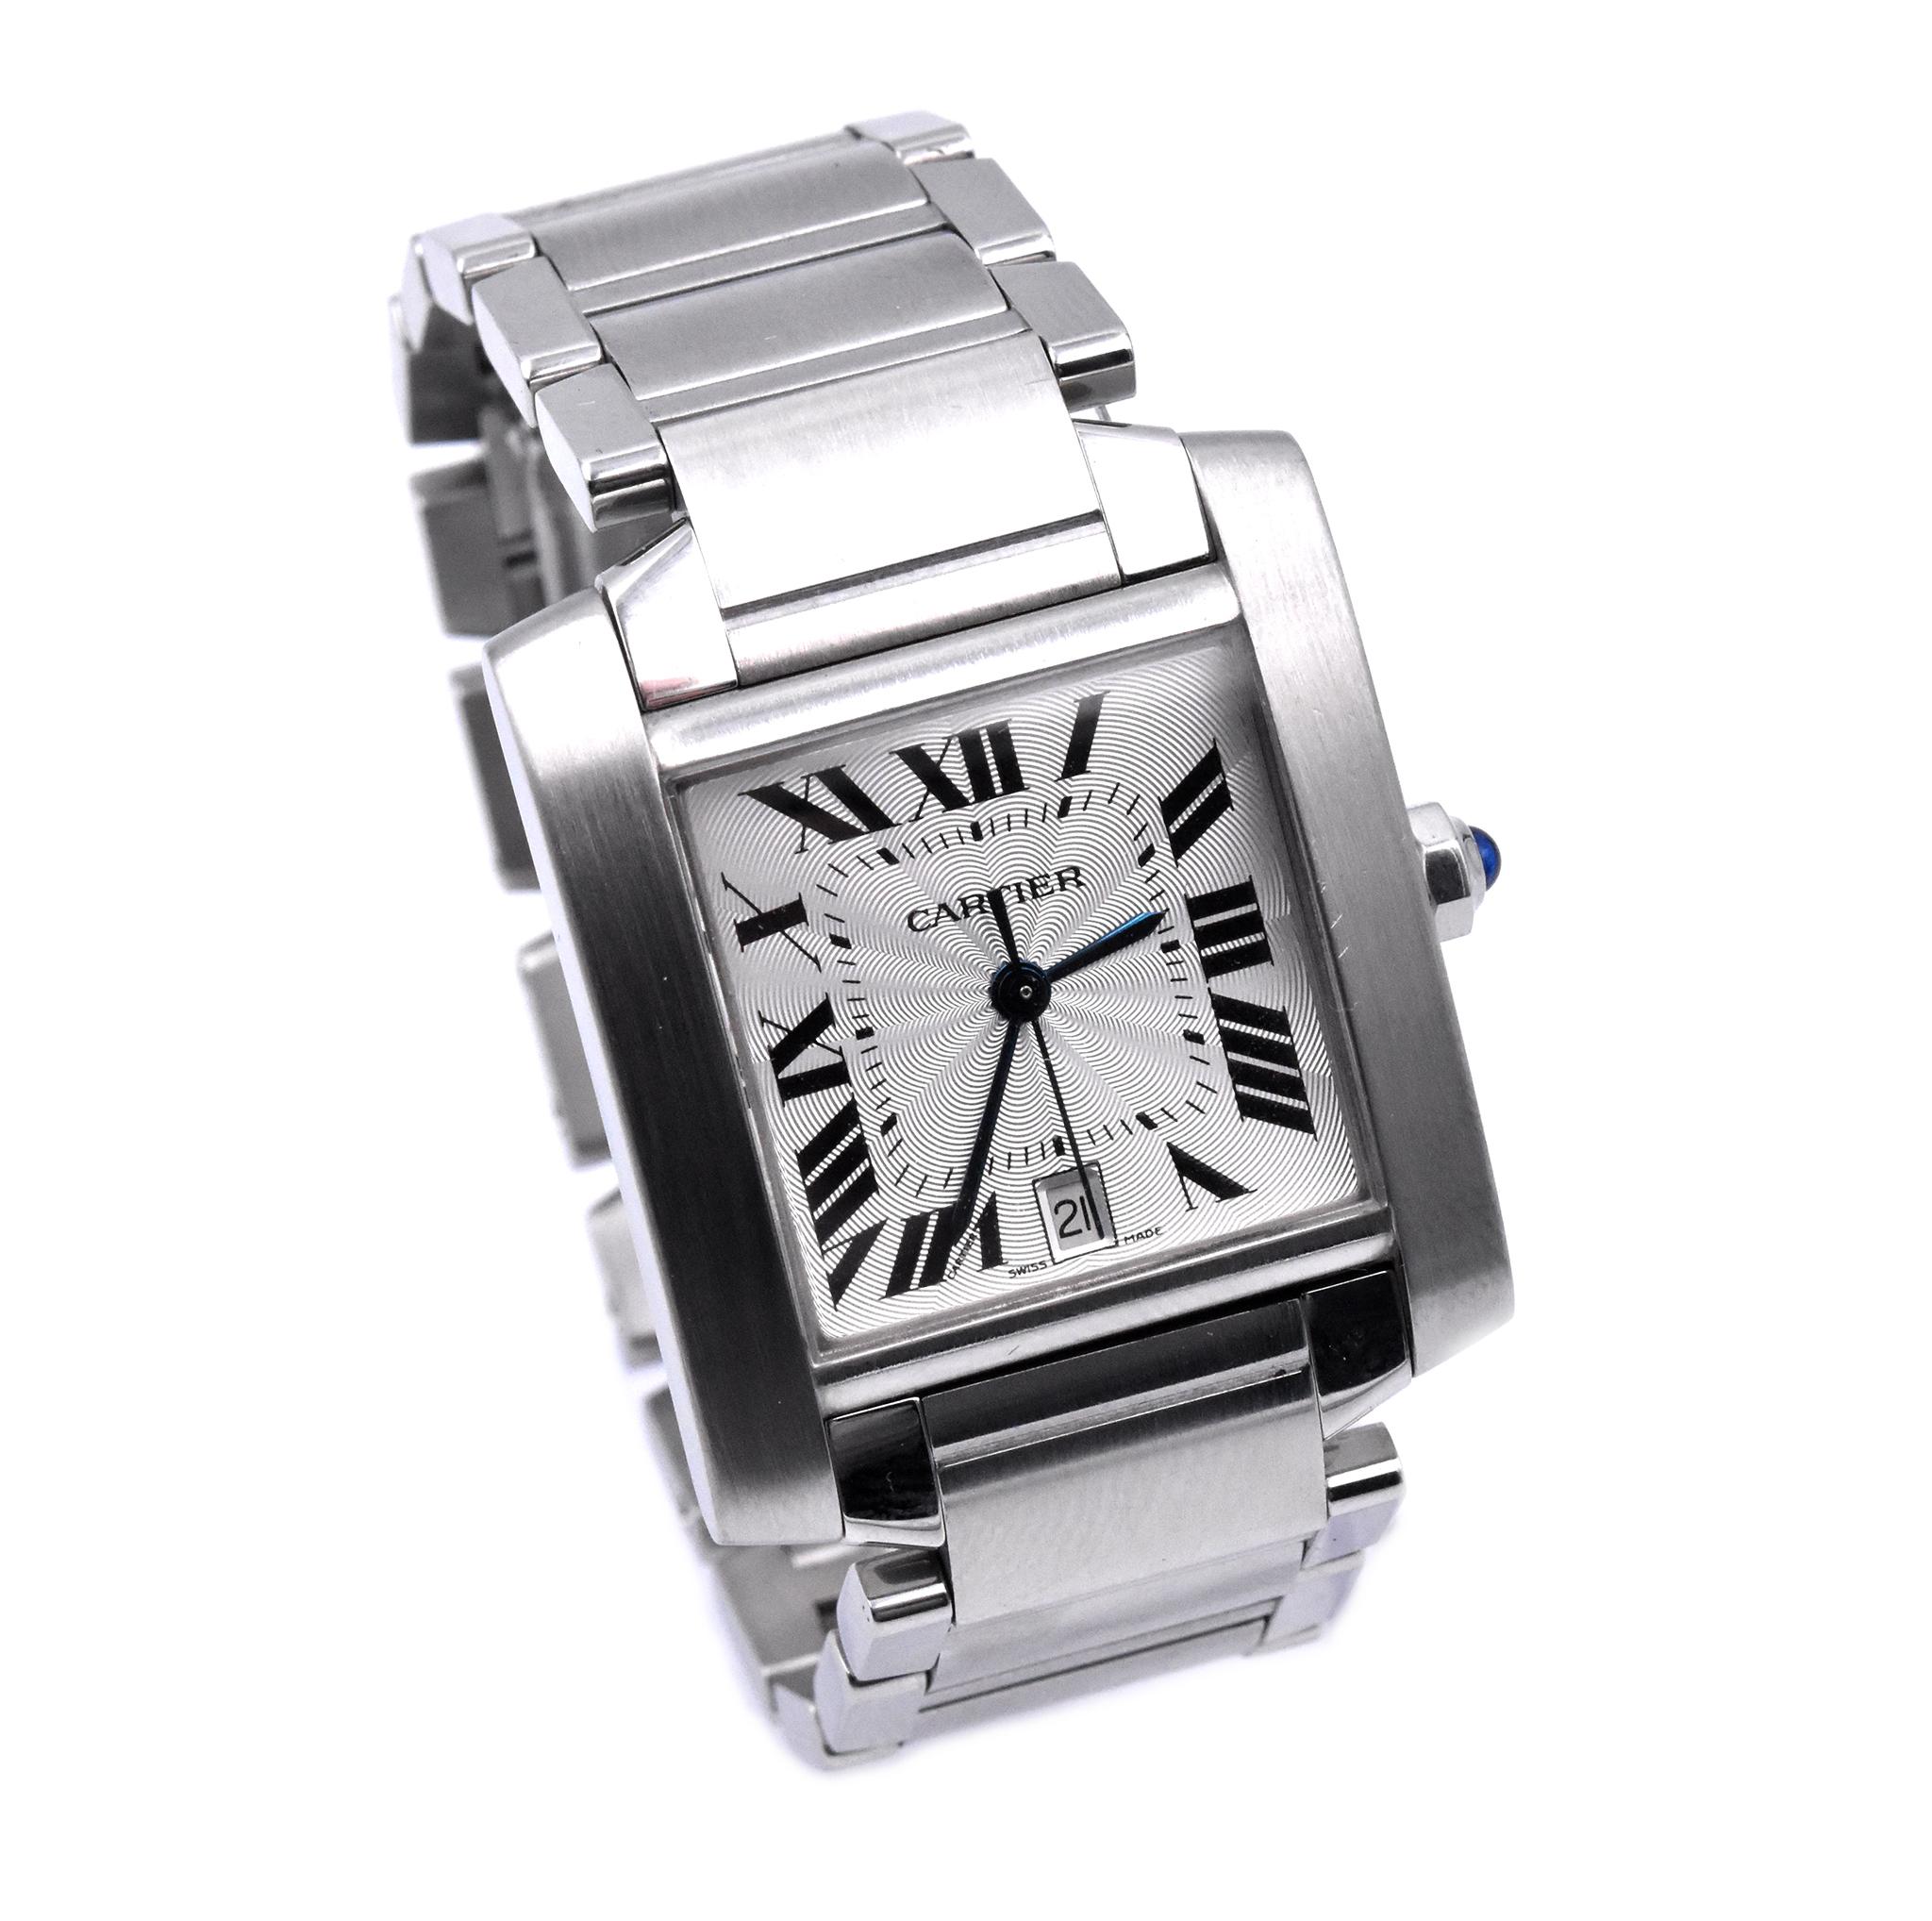 Movement: automatic
Function: hours, minutes
Case: 28mm x 33.5mm rectangular case, push pull crown, sapphire crystal
Dial: white dial, blue steeled hands, roman numeral hour markers
Band: stainless steel bracelet with butterfly clasp
Serial #: